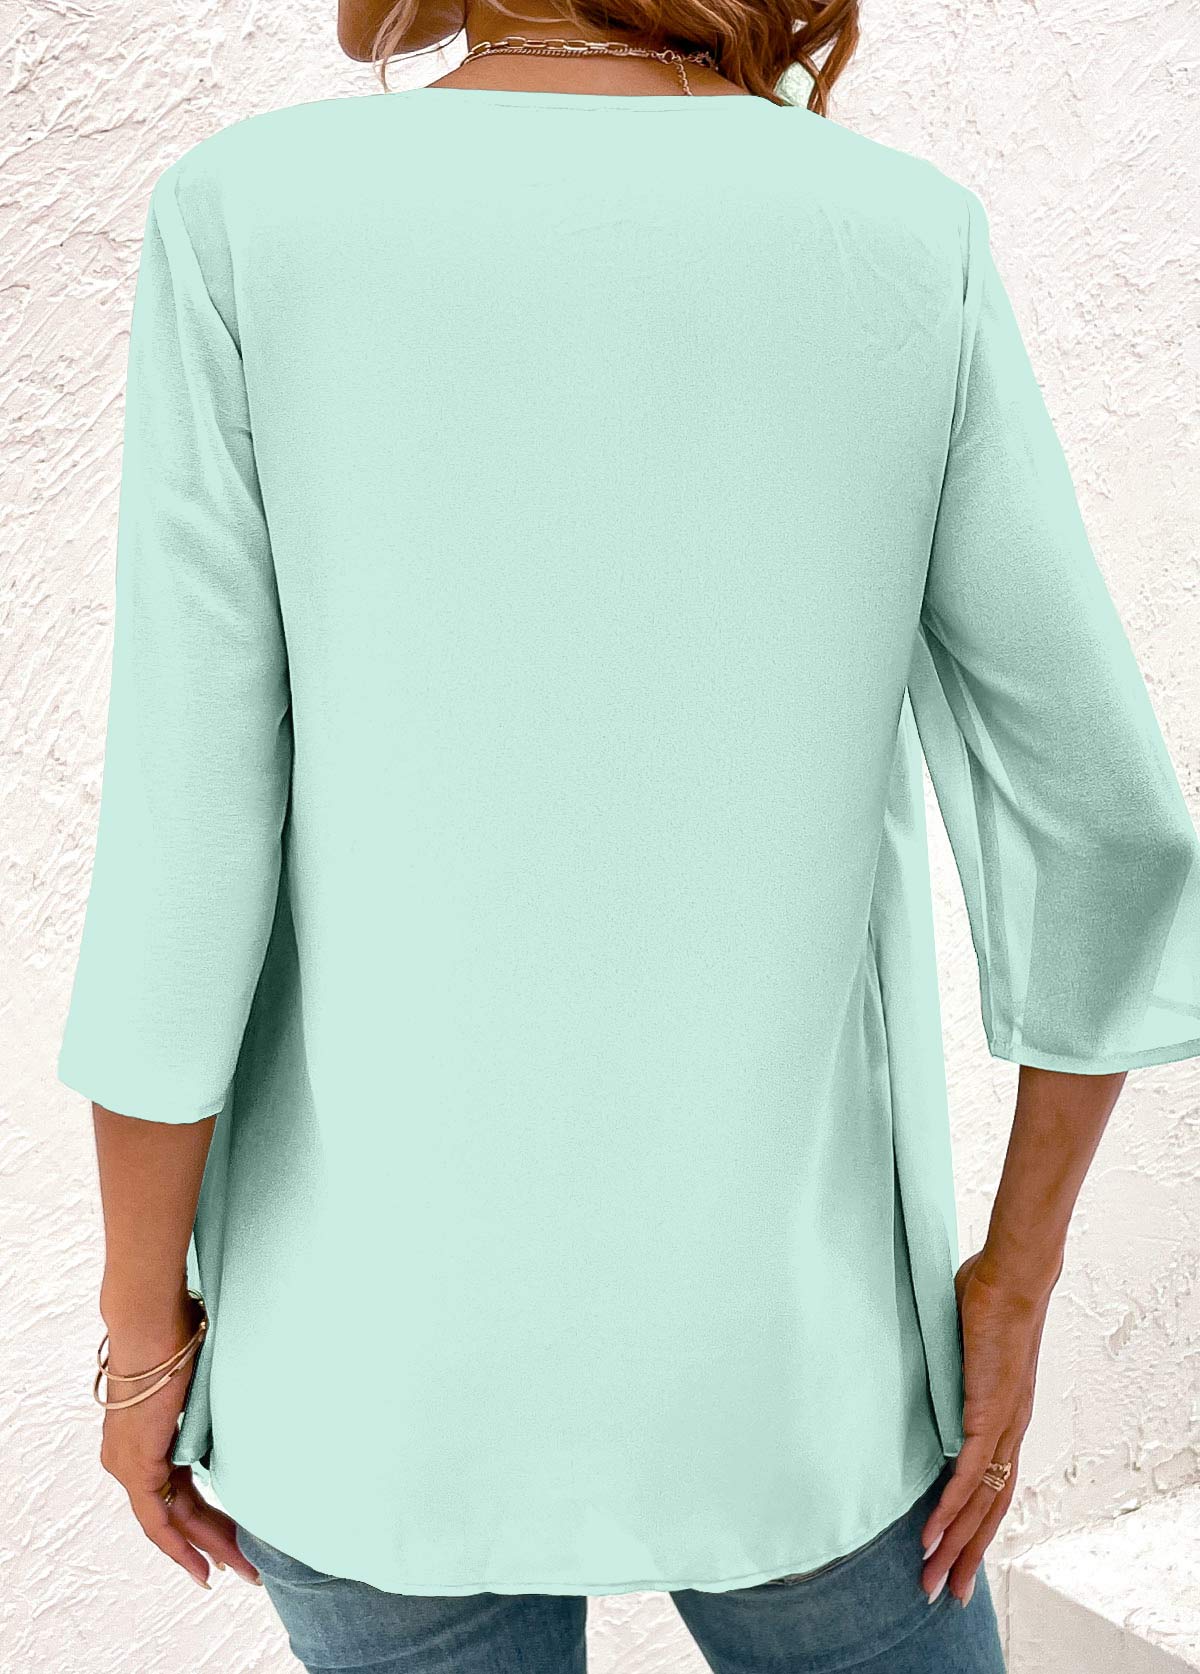 Plus Size Mint Green Fake 2in1 Blouse